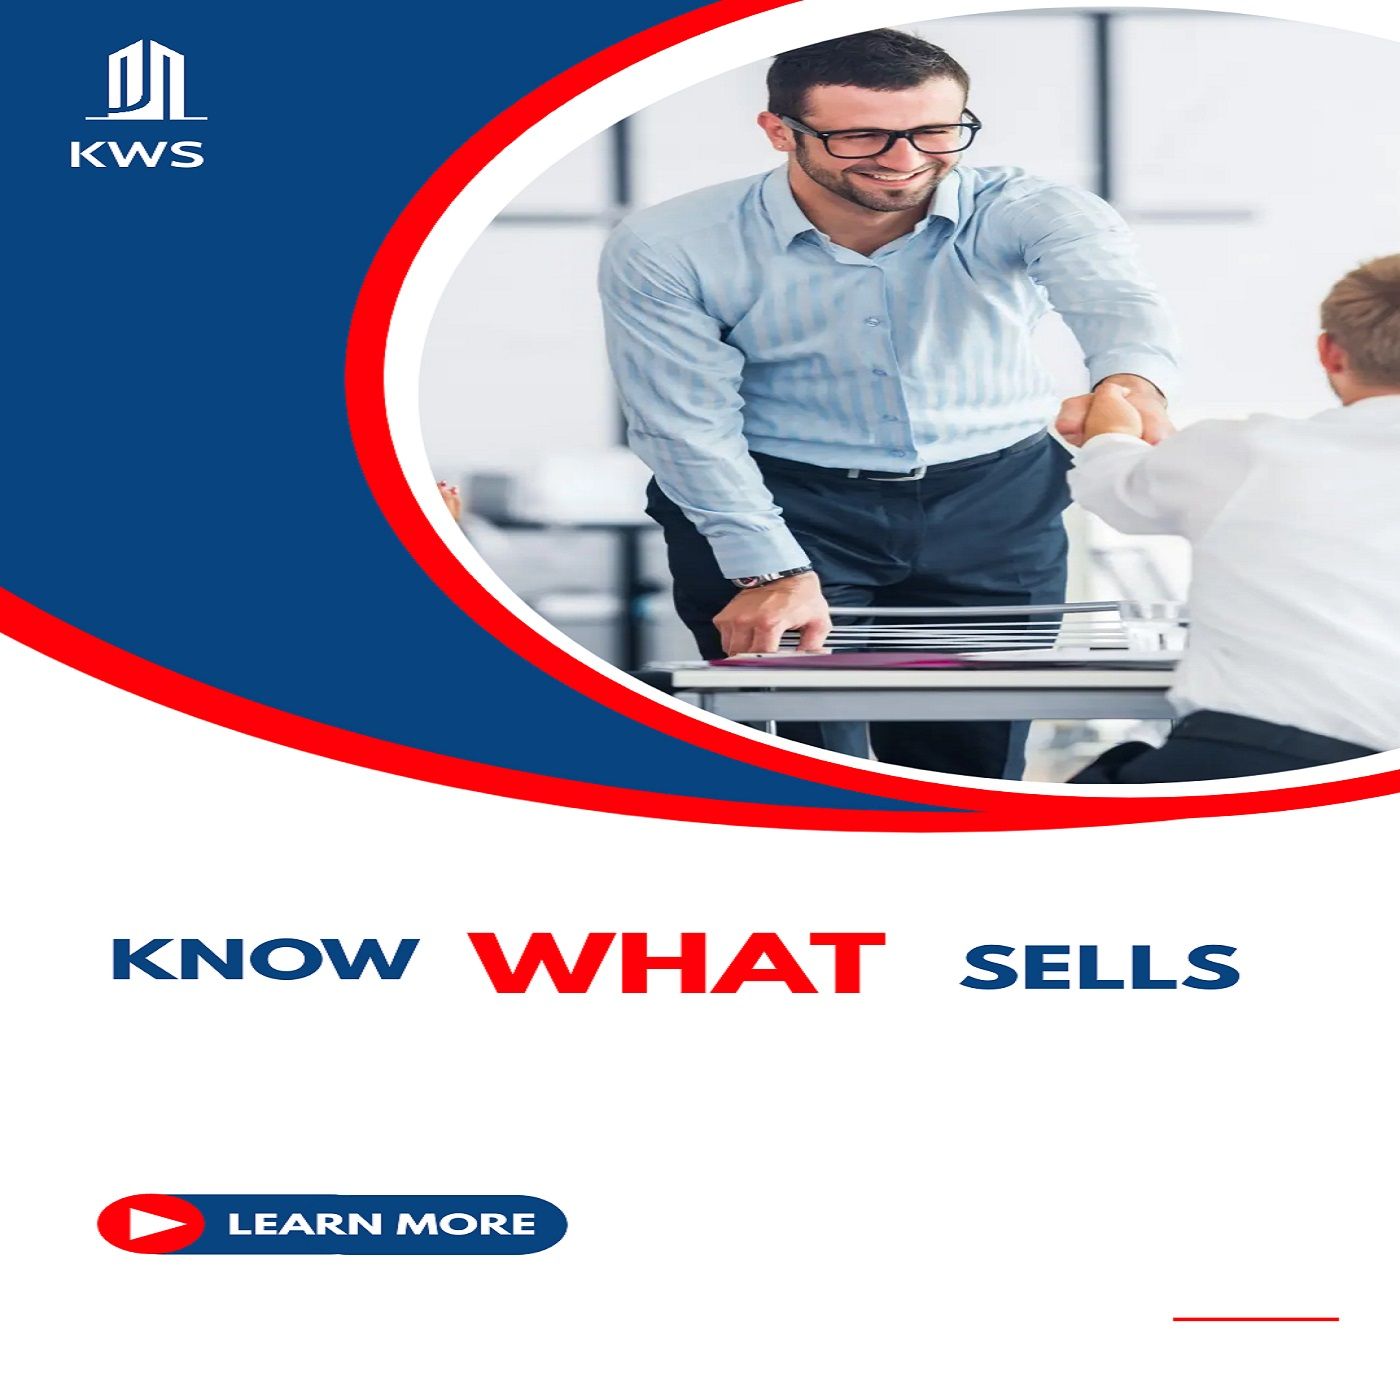 KNOW WHAT SELLS